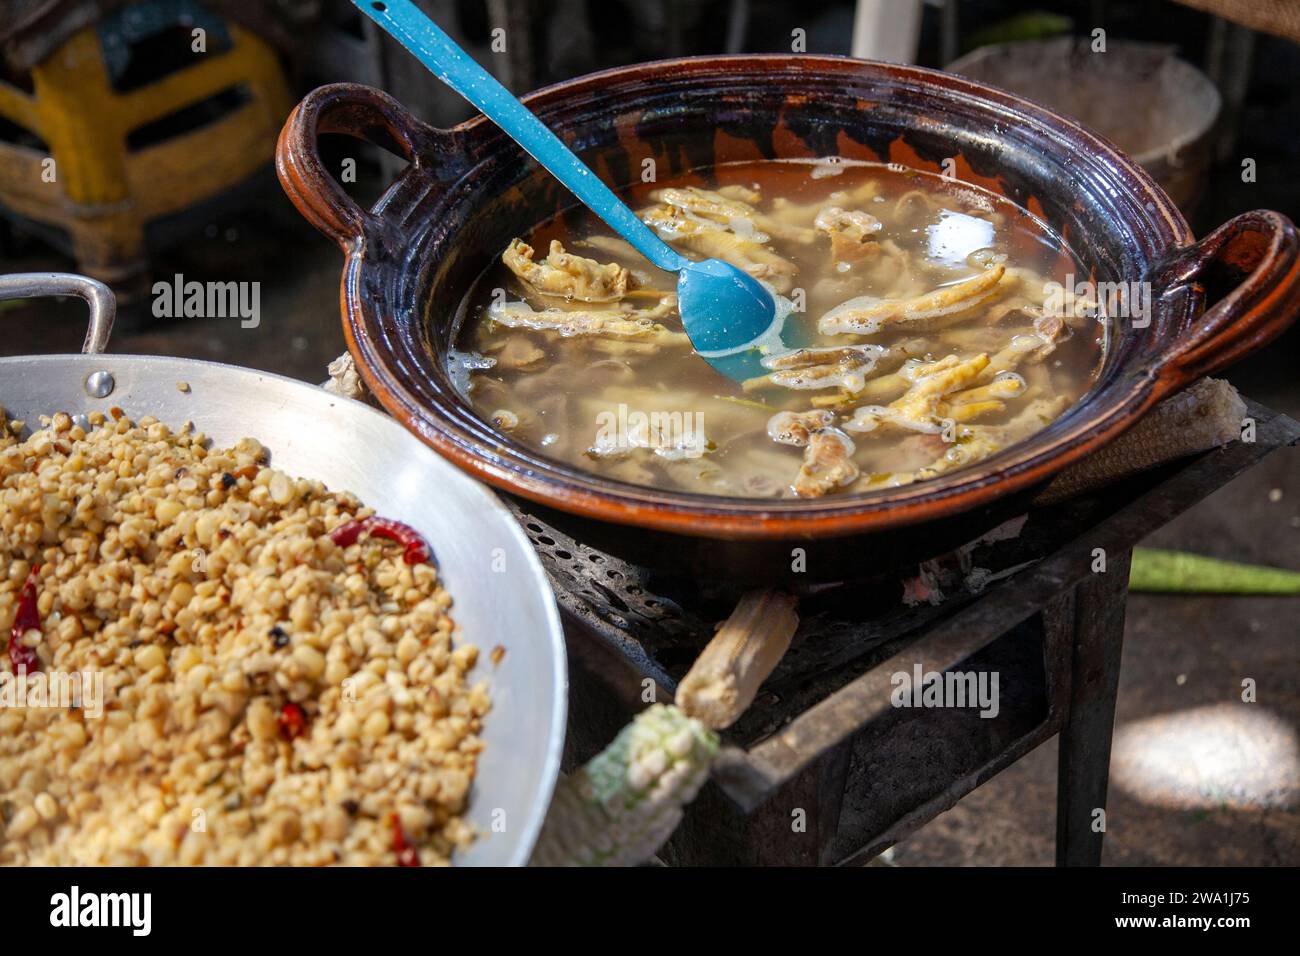 Food Vendor, Esquites and Chicken feet Broth at Jamaica market in Mexico City, Mexico Stock Photo